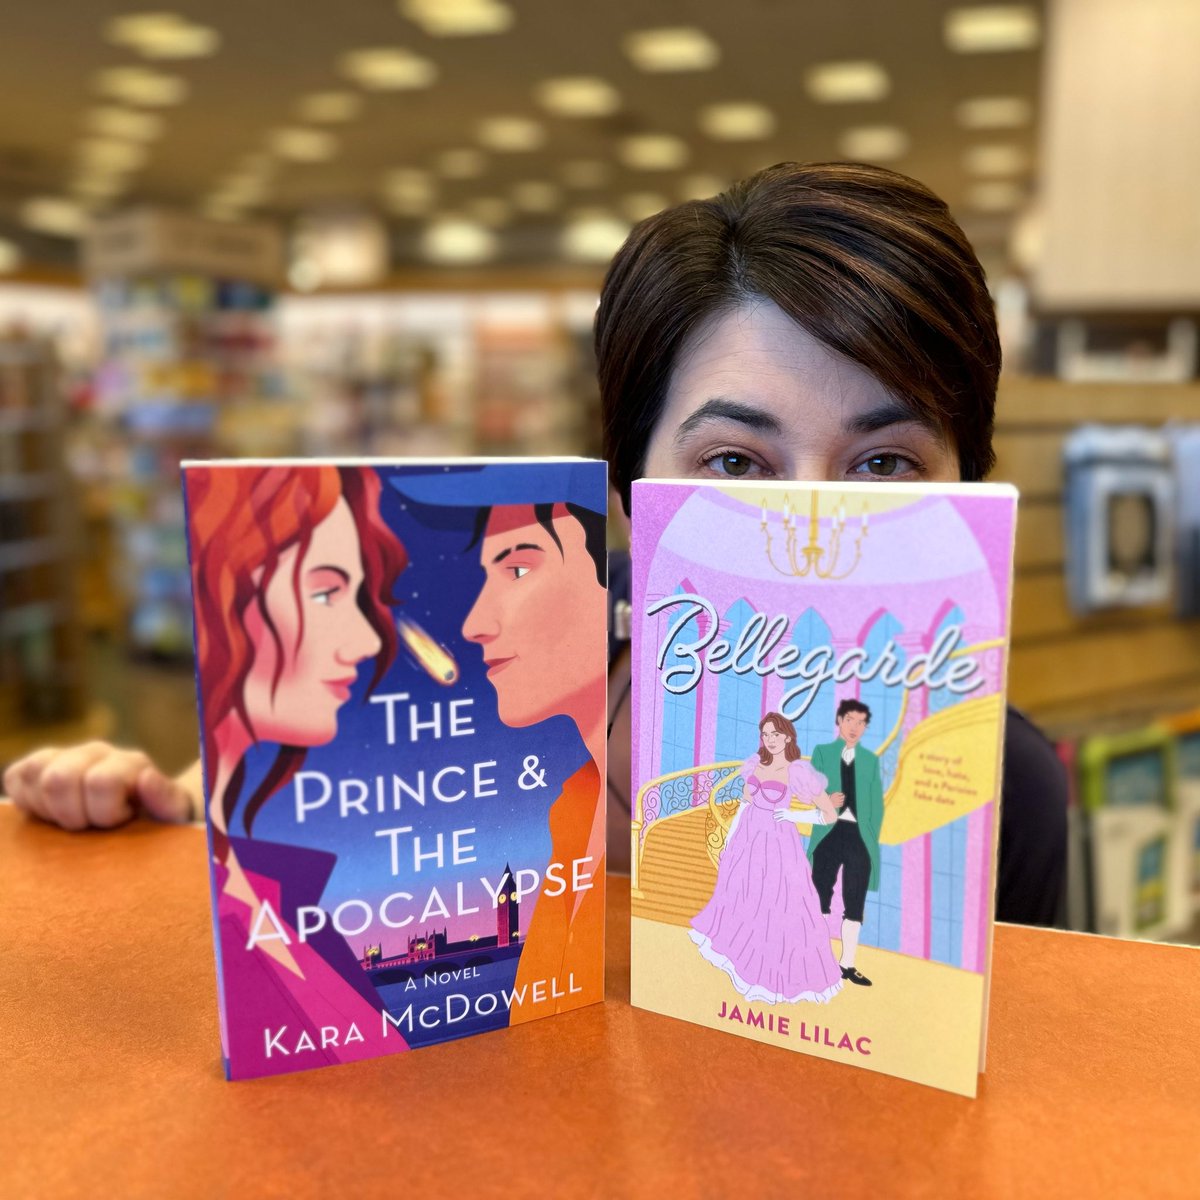 We’ve got our eyes on these #YANewReleases!

👁️ The Prince and The Apocalypse by @karajmcdowell
👁️ Bellegarde by @jamie_lilac

#barnesandnoble #yathursday #newreleases #newbooks #bnvancouver #vancouverusa